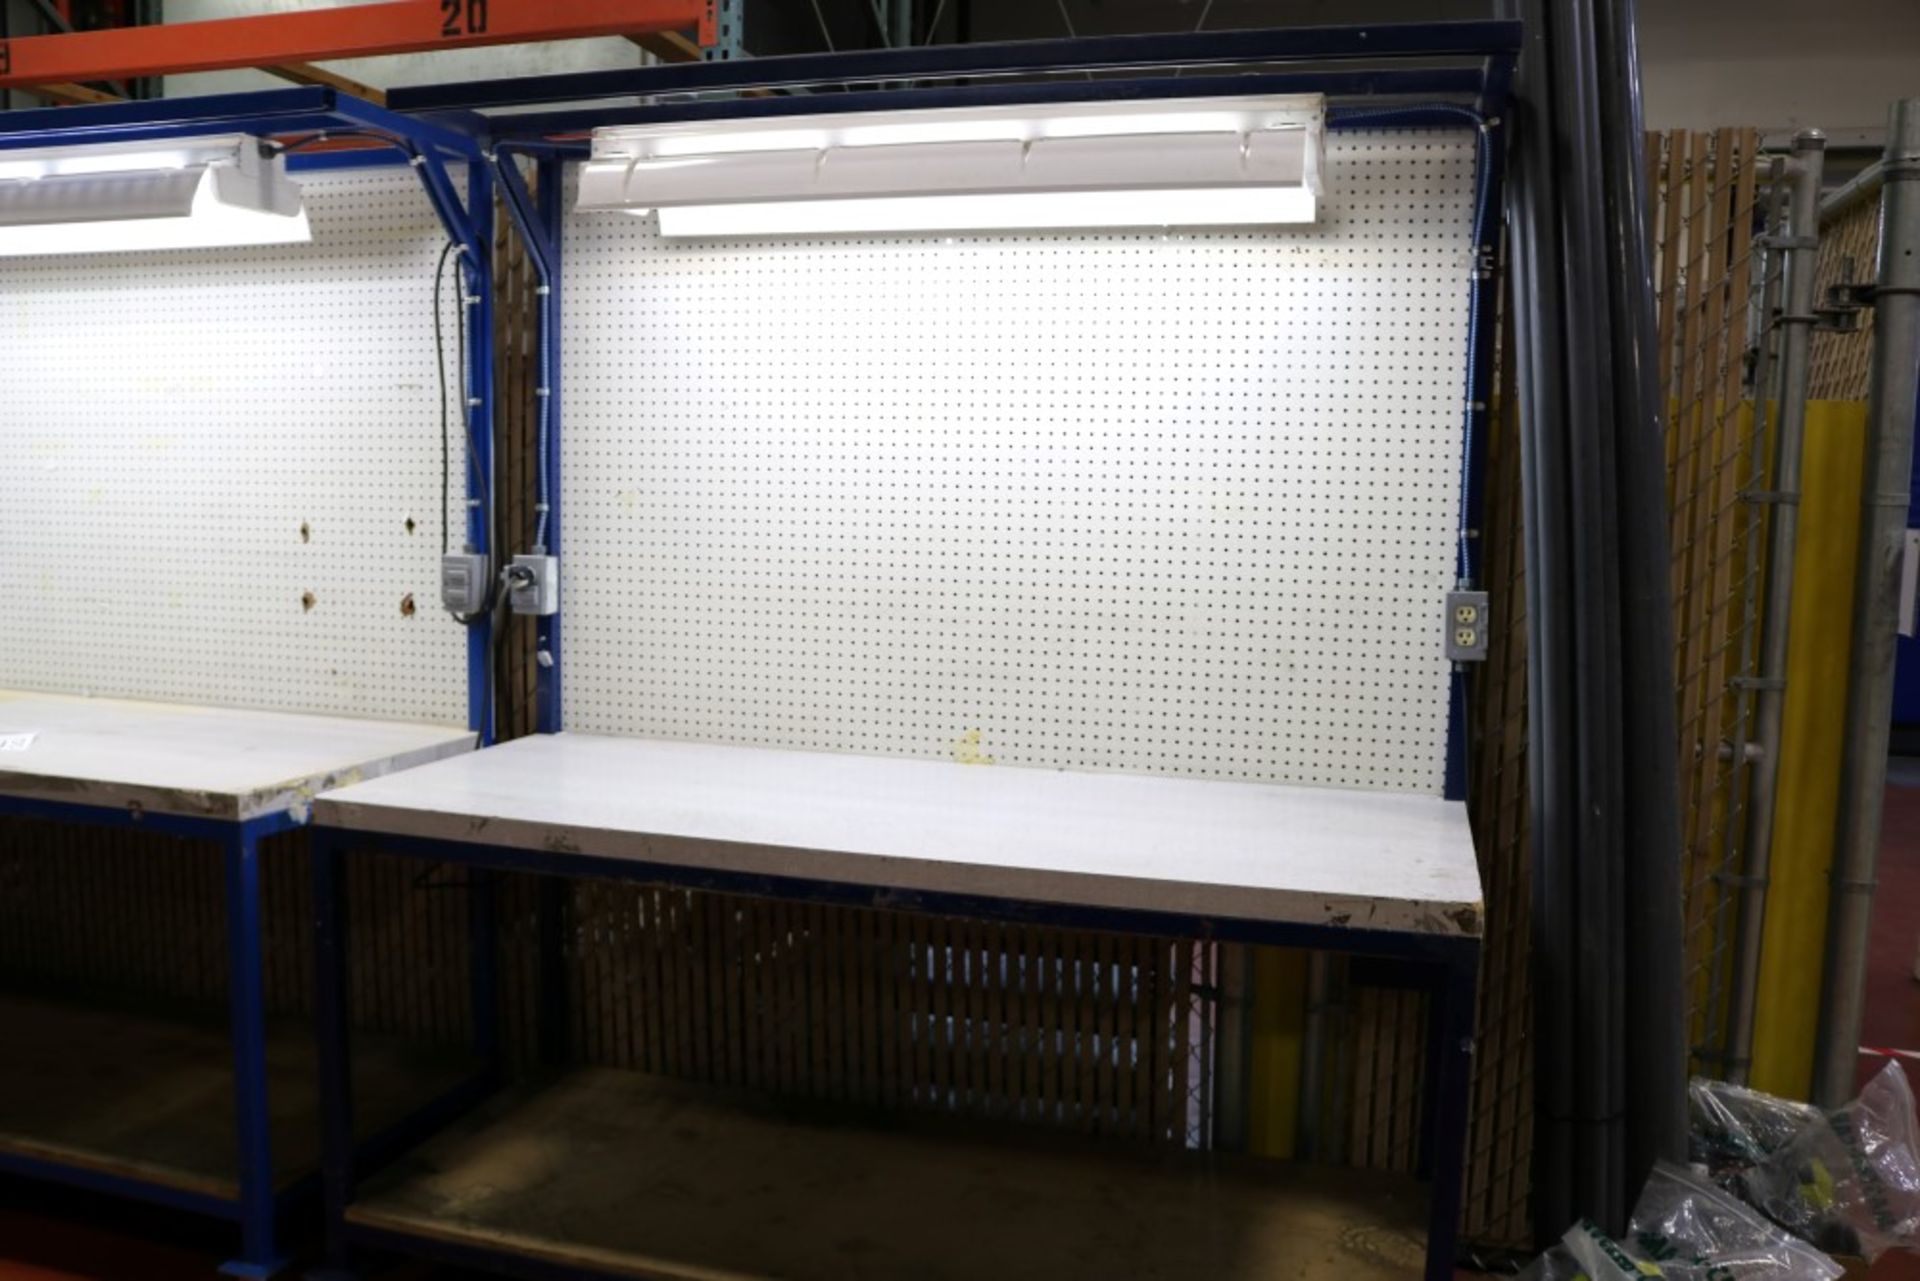 Work Station - 30" x 36" x 72" Rolling Workbench w/ 4' x 6' pegboard backing and 4' Shop Light